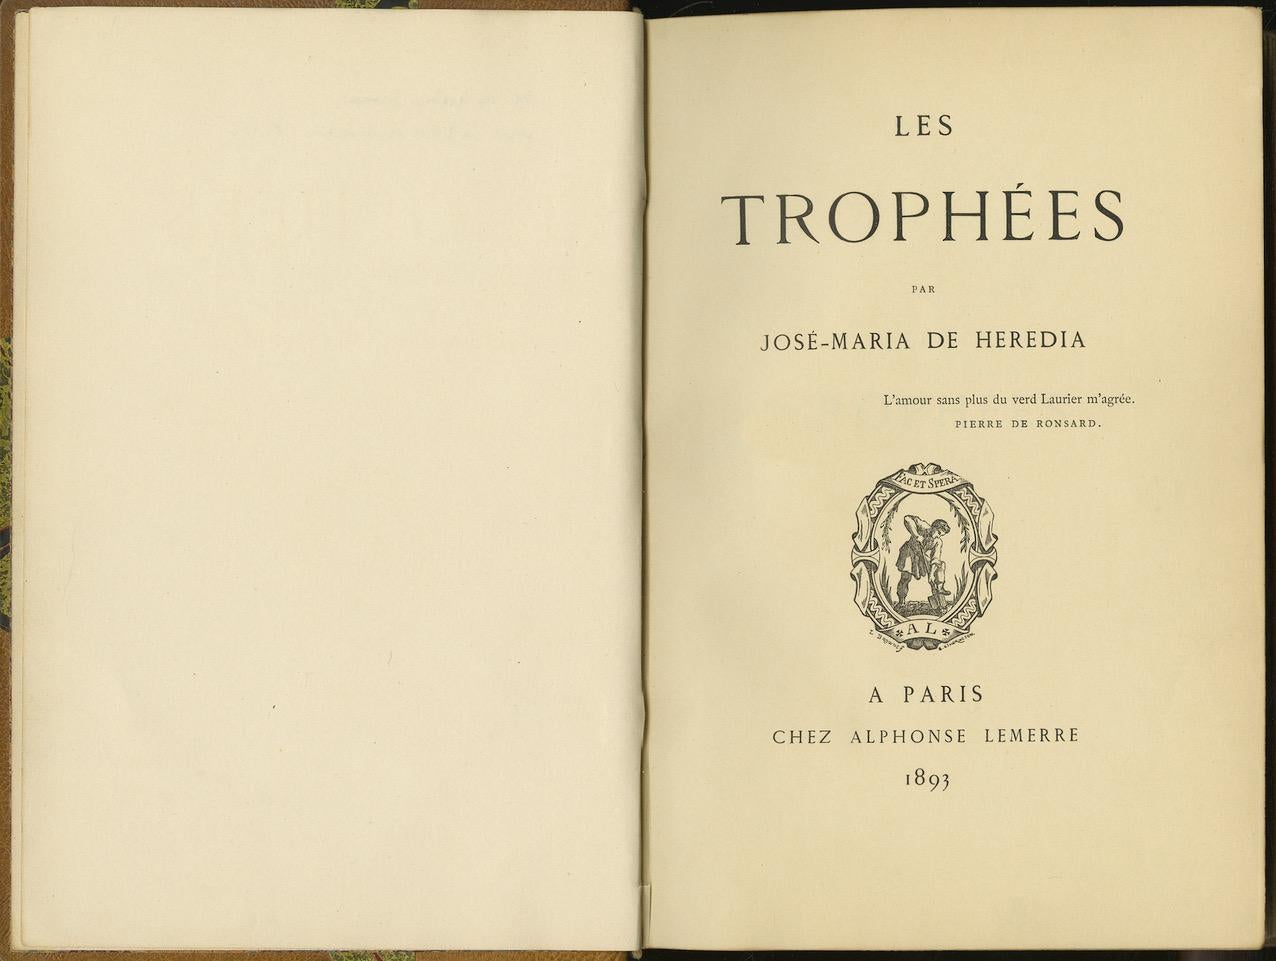 This handsome SIGNED copy of Les Trophées comes from the celebrated library of the French collector and bibliophile Guy Bigorie, who often collected bibliographic 